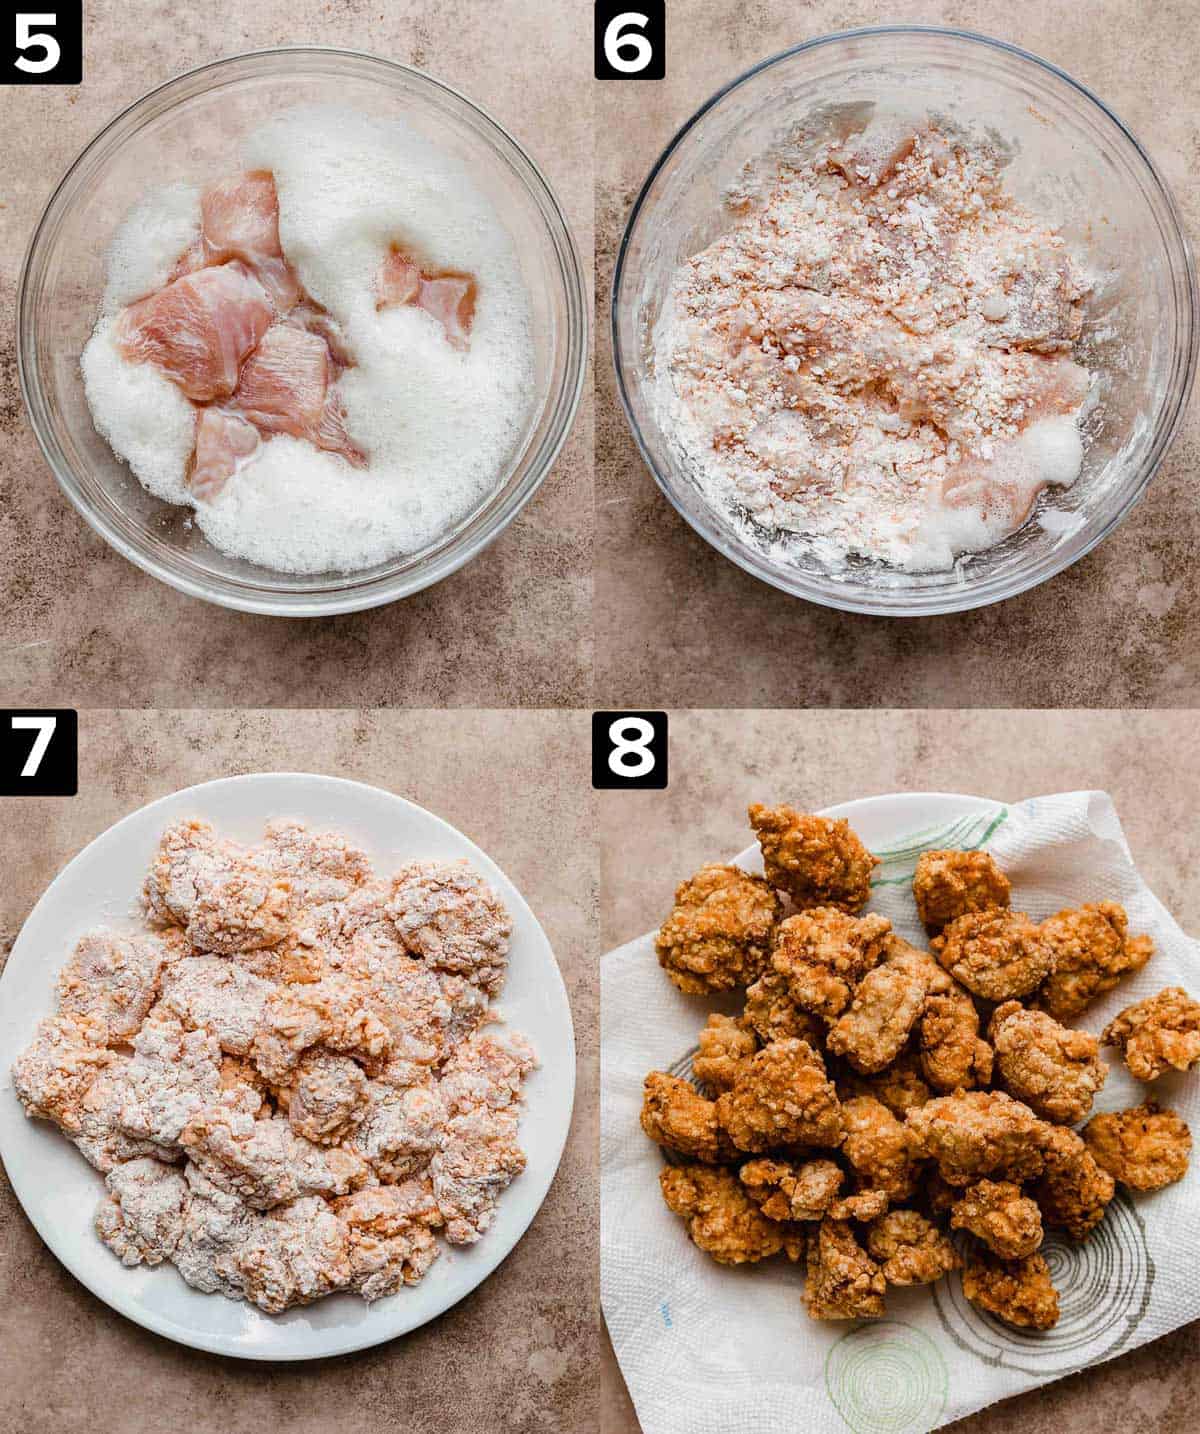 Four images showing raw chicken in egg whites, dredged in a flour mixture, then fried.